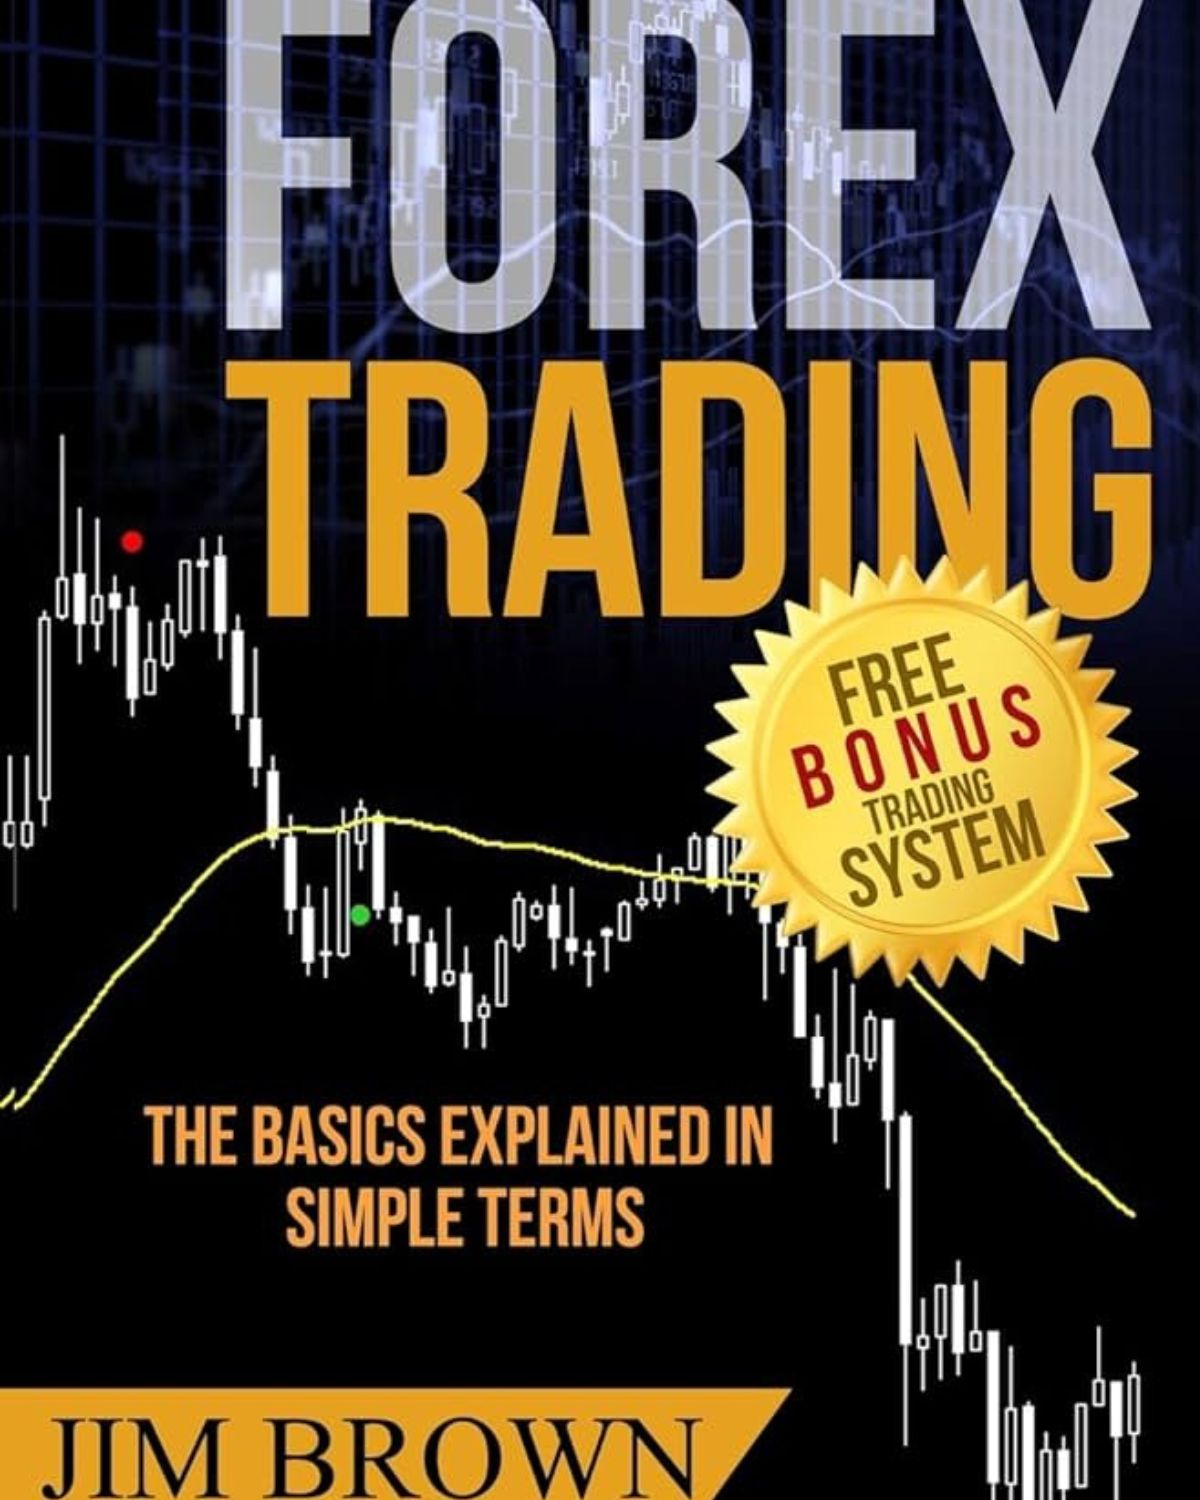 Forex Trading The Basics Explained in Simple Terms by Jim Brown.jpg